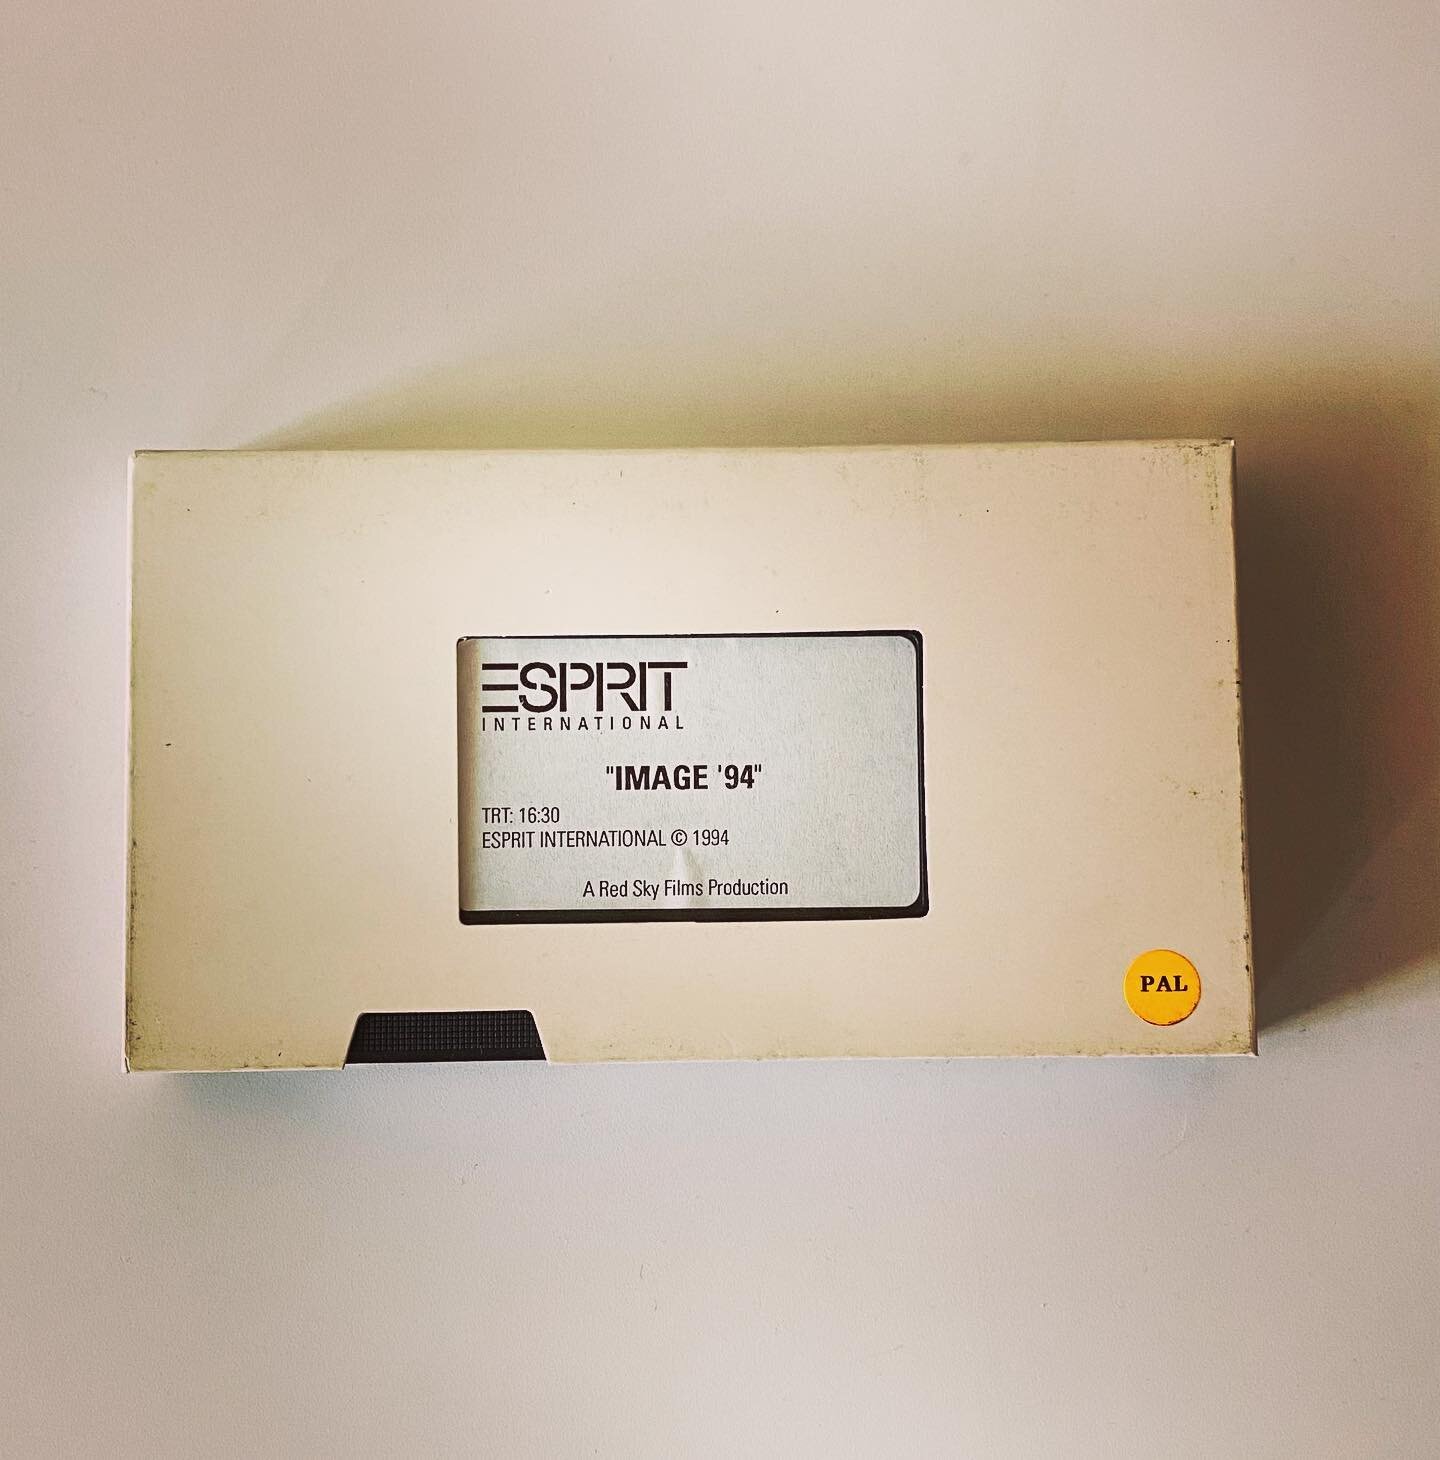 📼 Finally found a vendor who can digitize PAL format! Cannot wait to view the content! 👀 
_
Esprit International
IMAGE &lsquo;94
A Red Sky Films Production 
TRT: 16:30
_
Gift of @californiaistoocasual 
.
.
.
.
.
.
.
#esprit #90s #1994 #PAL #image #